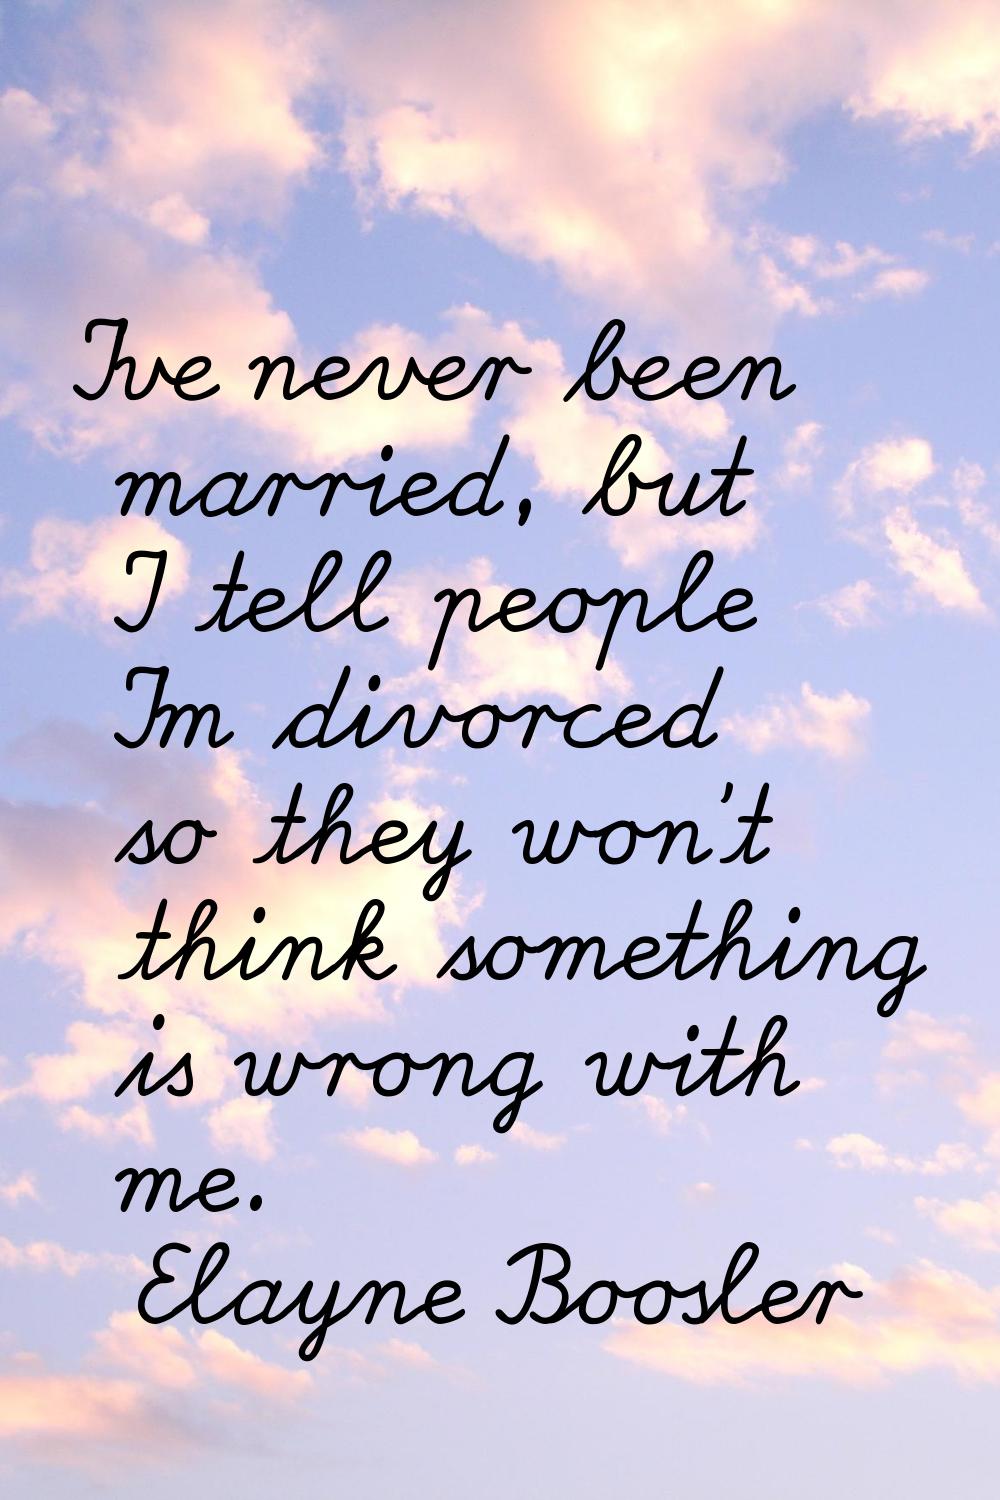 I've never been married, but I tell people I'm divorced so they won't think something is wrong with